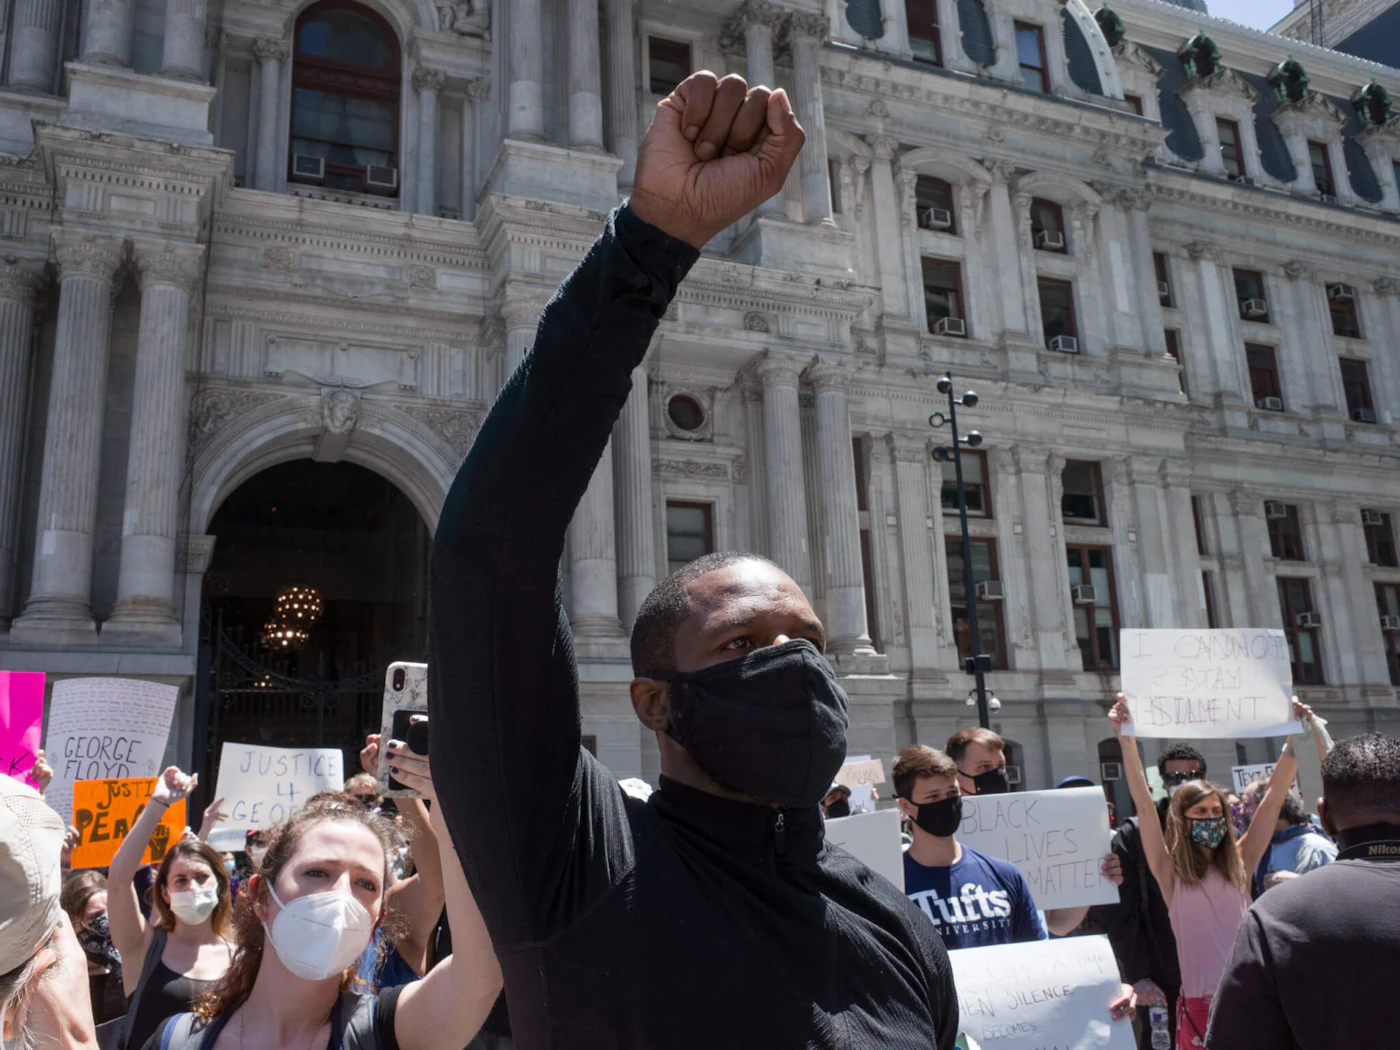 A scene from a protest in the aftermath of the death of George Floyd, an unarmed black man who was killed by a white police officer in Minneapolis on May 25 2020. Image via Shutterstock